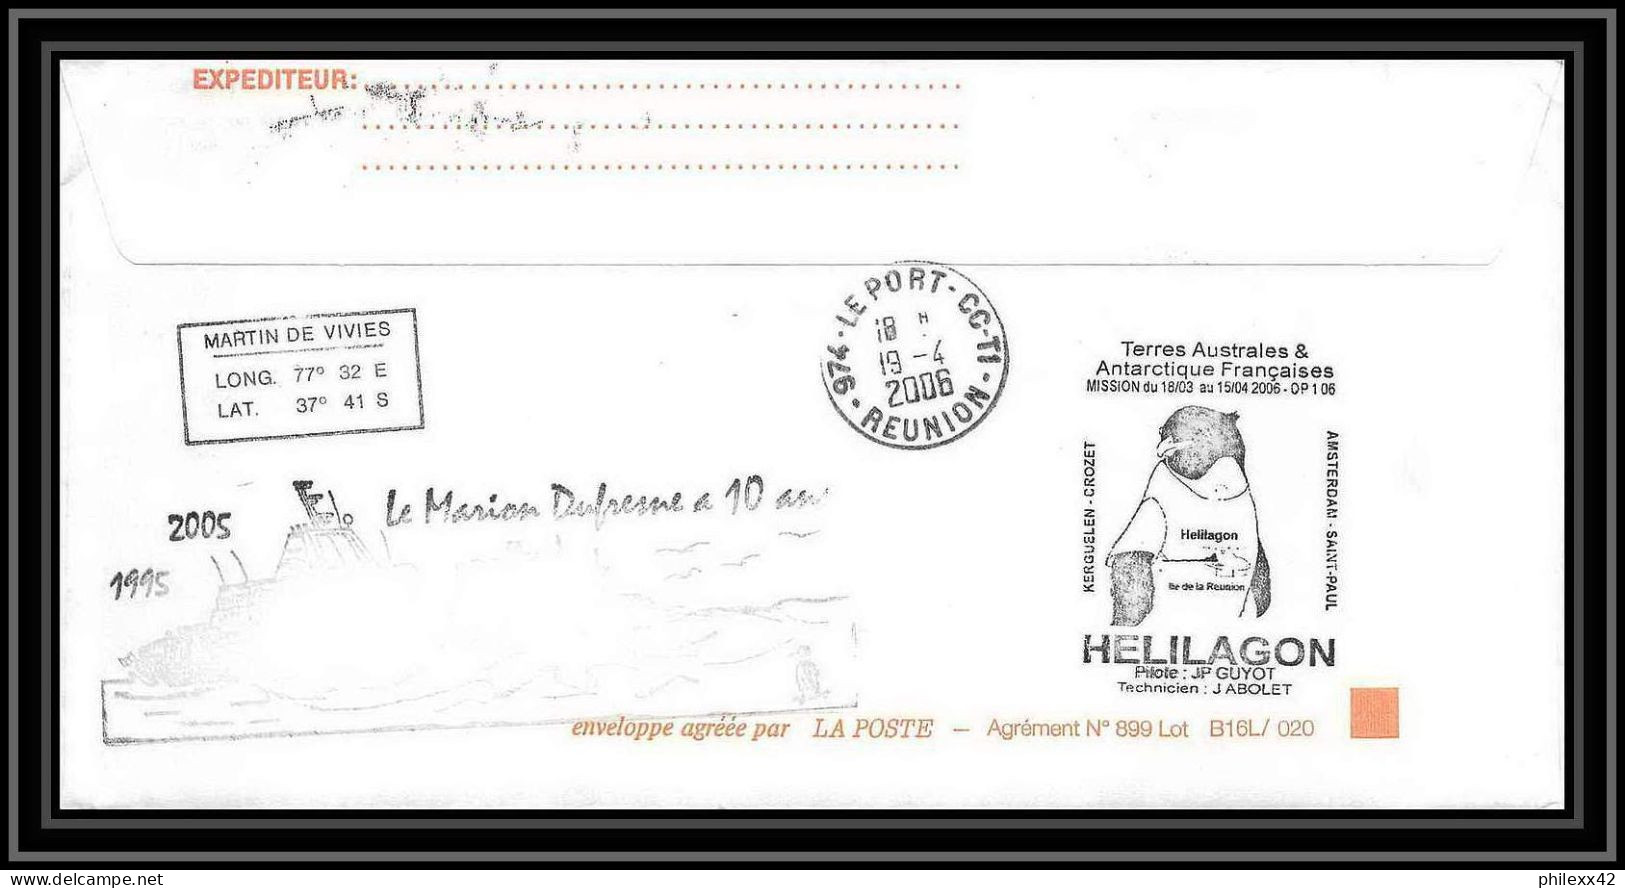 2574 ANTARCTIC Terres Australes TAAF Lettre 10 Ans Du Dufresne 2 Signé Signed OP 2006/1 SAINT PAUL N°408 Helilagon Prion - Helicopters